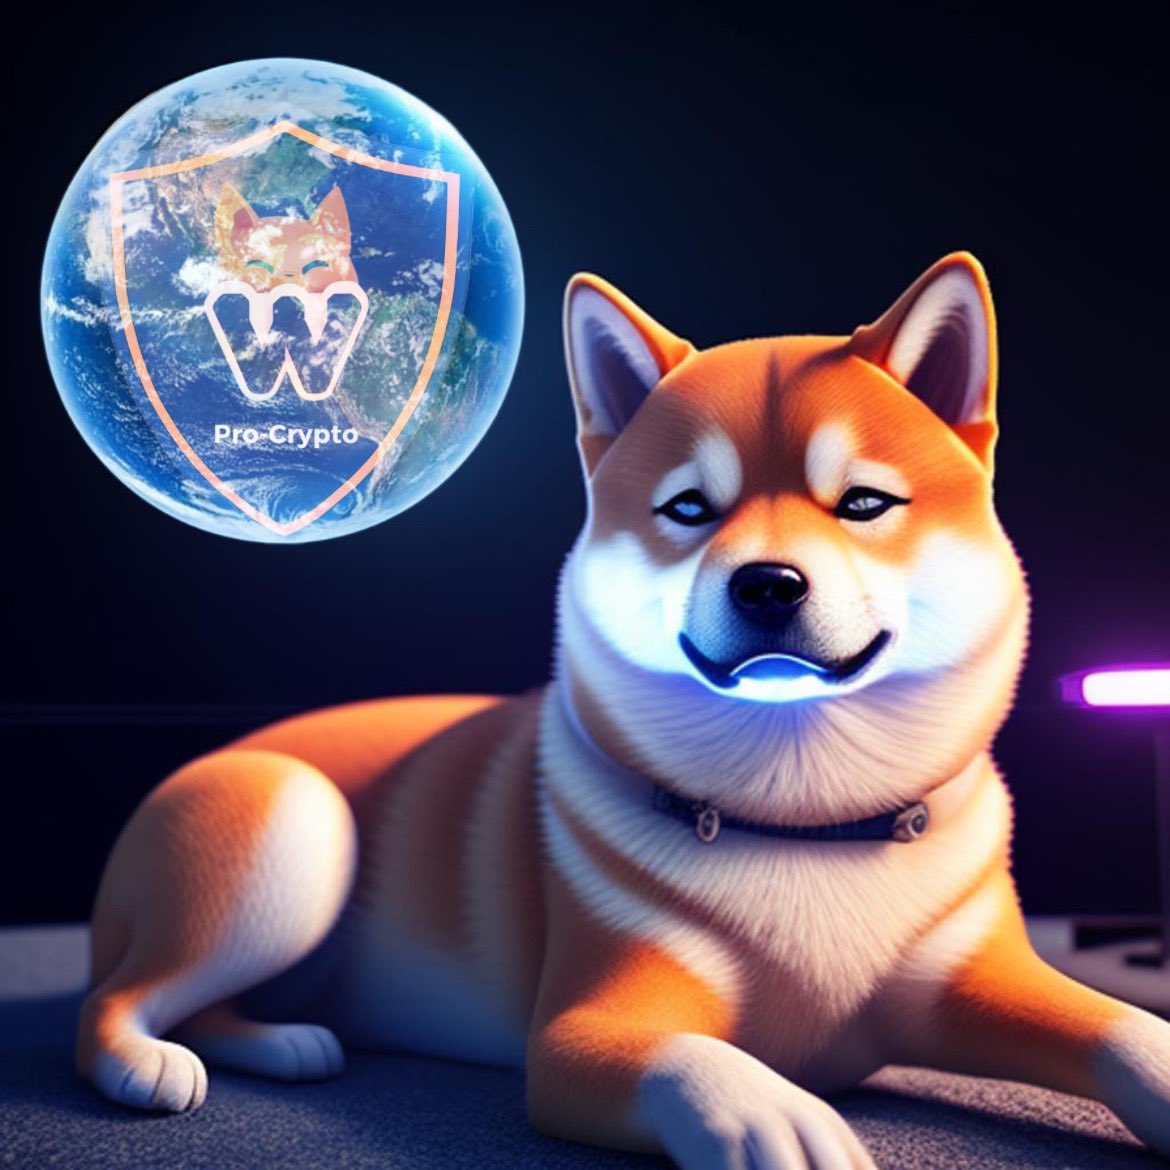 JUST IN: 

Top $SHIB whale has added $10 million worth of Shiba Inu to their portfolio in a single transaction. 

They now hold 5.28 trillion tokens which is valued at $35 million.

#bykea #chefdammy #PEPE #MONG #SenthilBalaji #TheErasTou #Crypto #earthquake #StanleyCupFinals